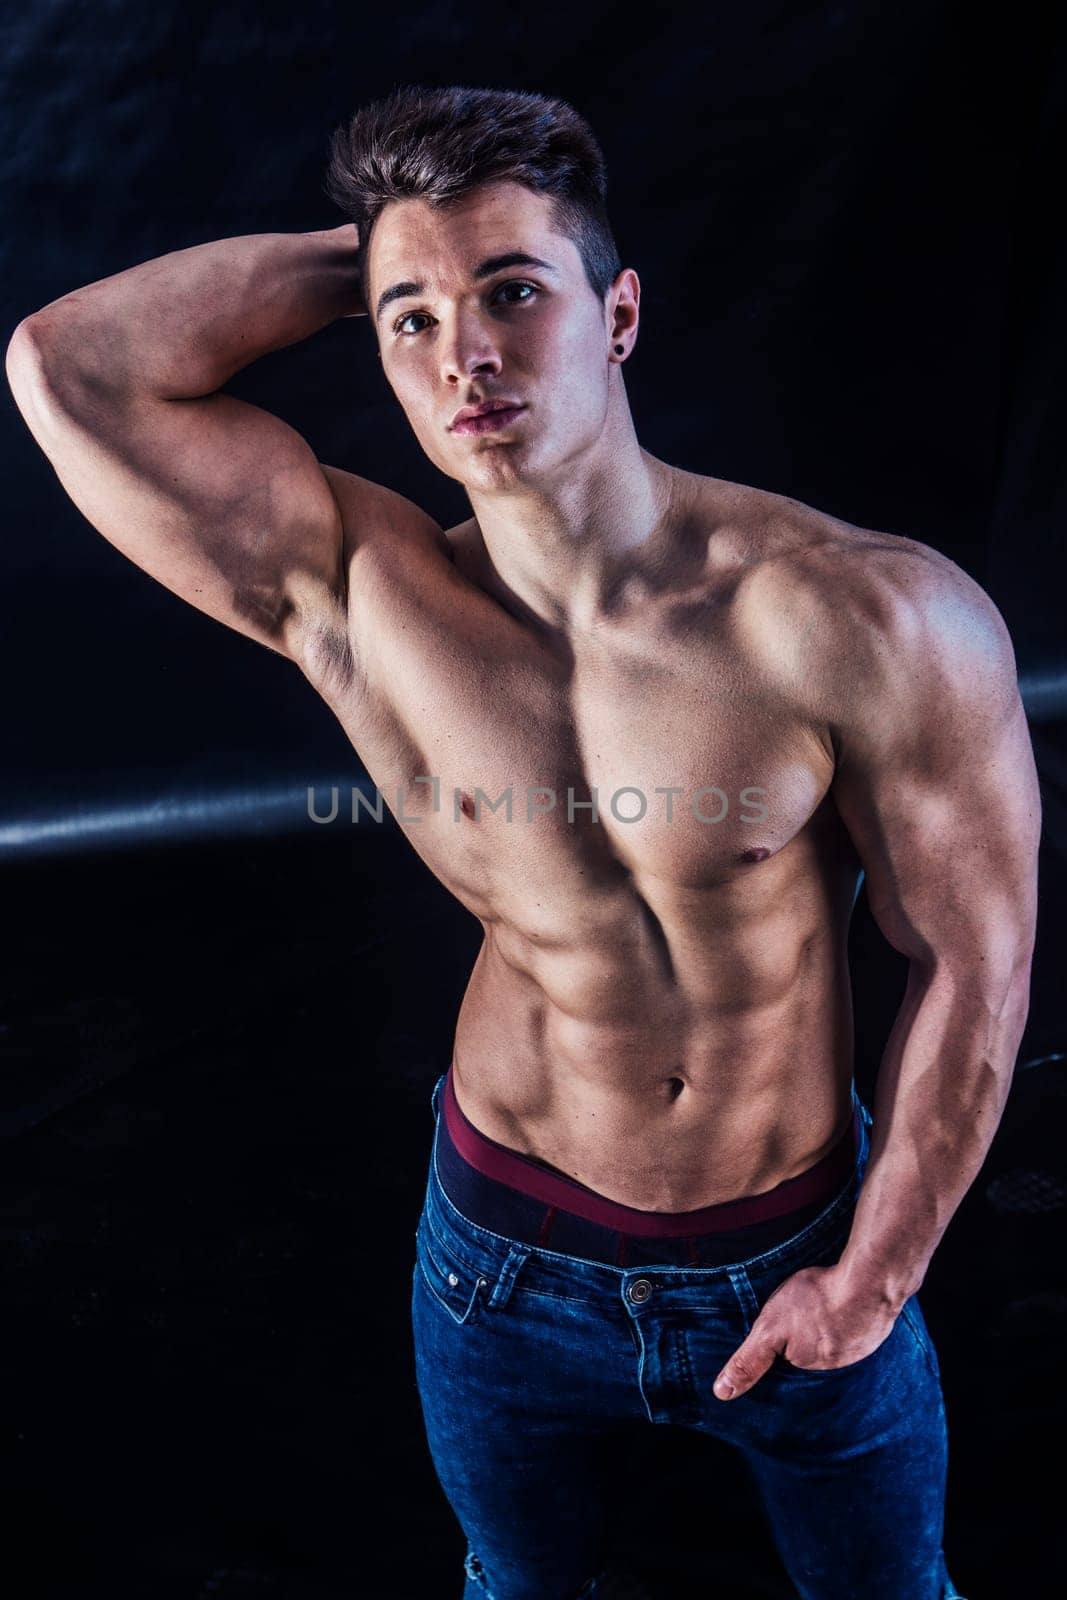 Young muscleman standing shirtless on black background by artofphoto